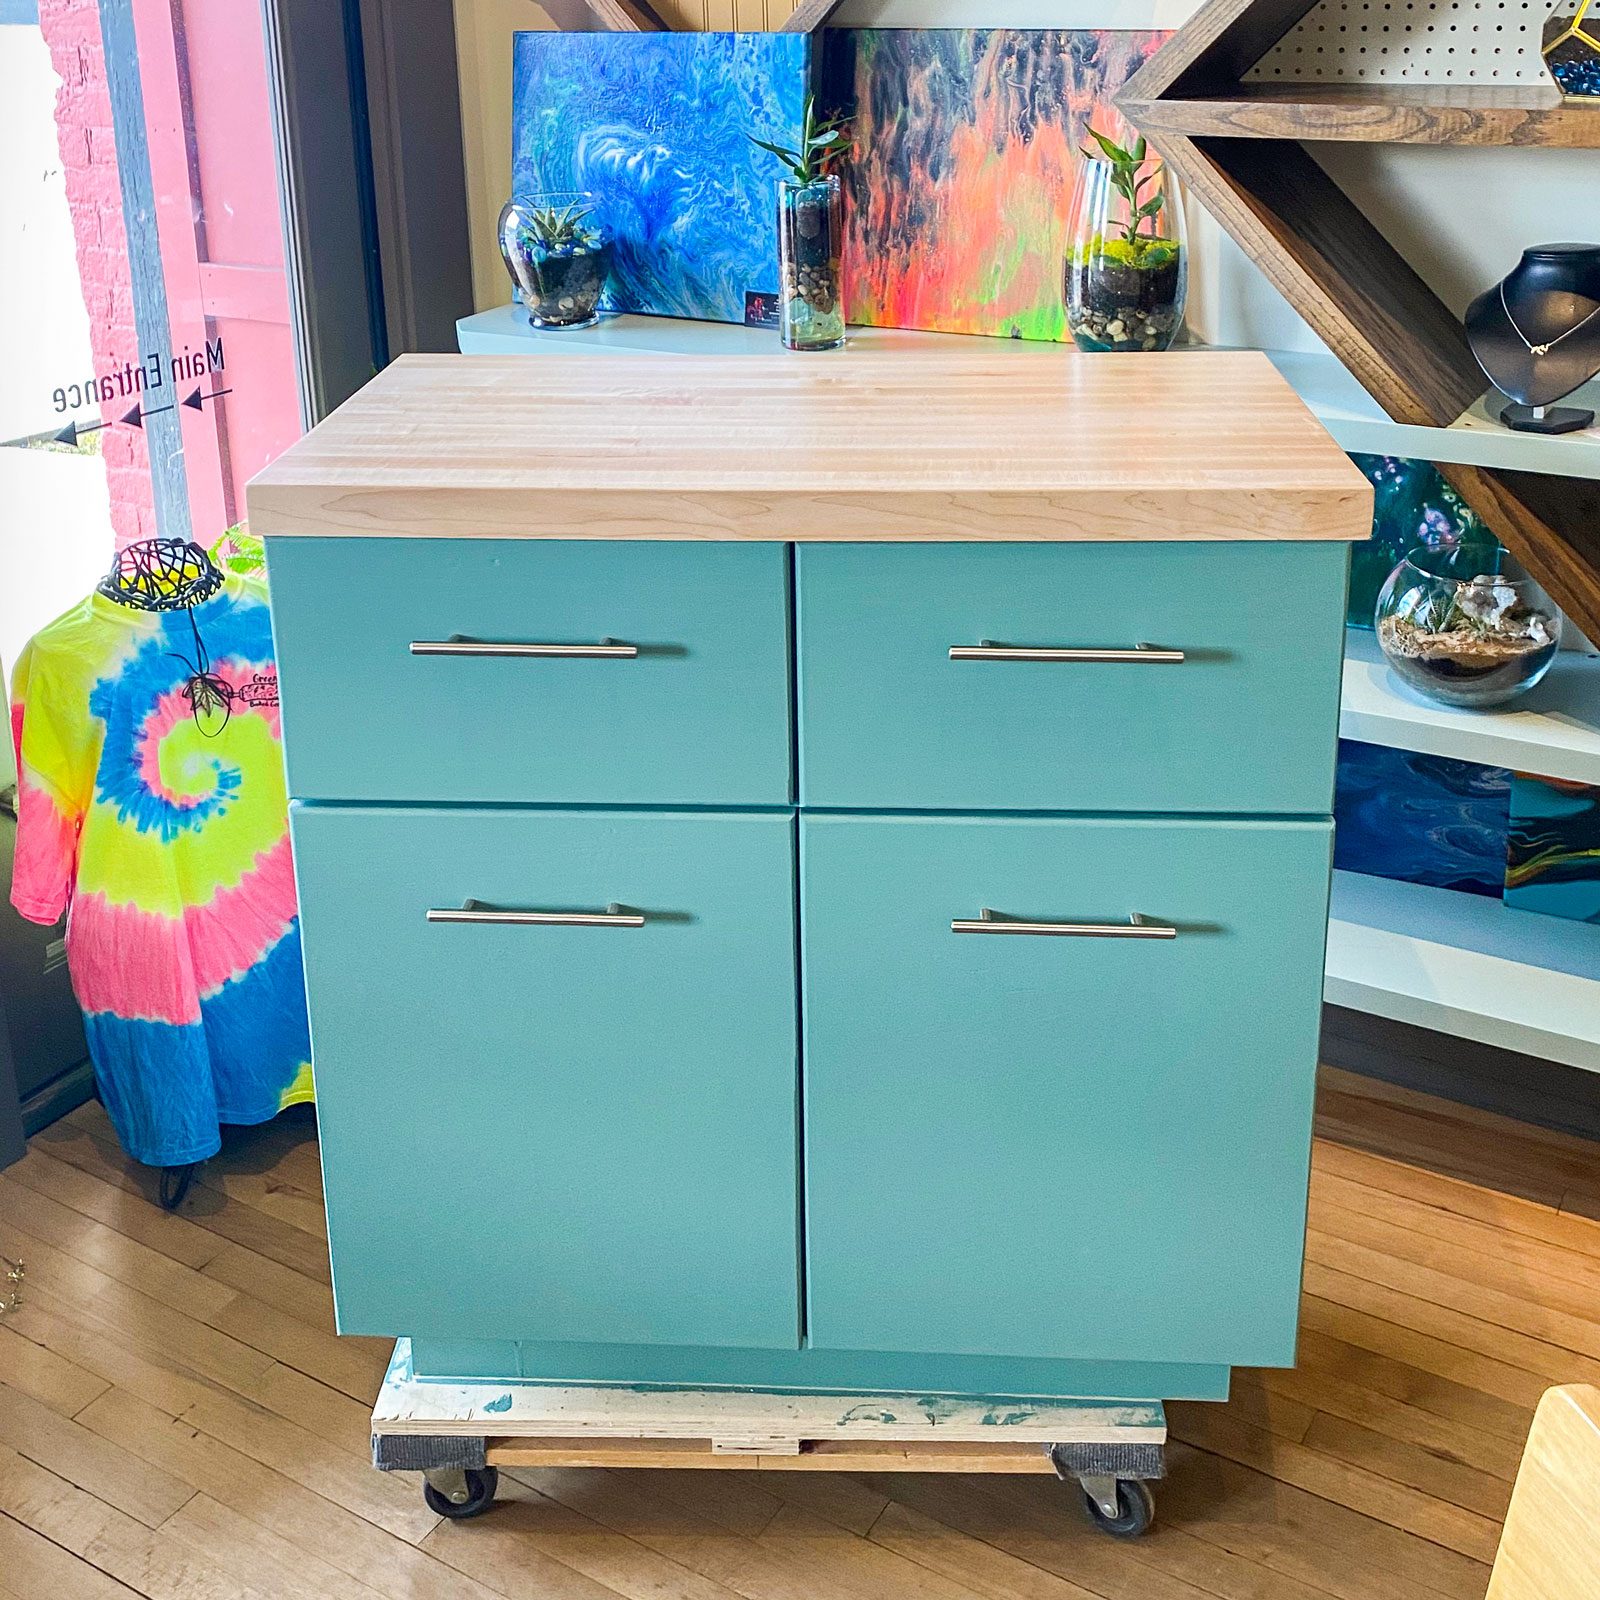 A turquoise kitchen storage cabinet in a store